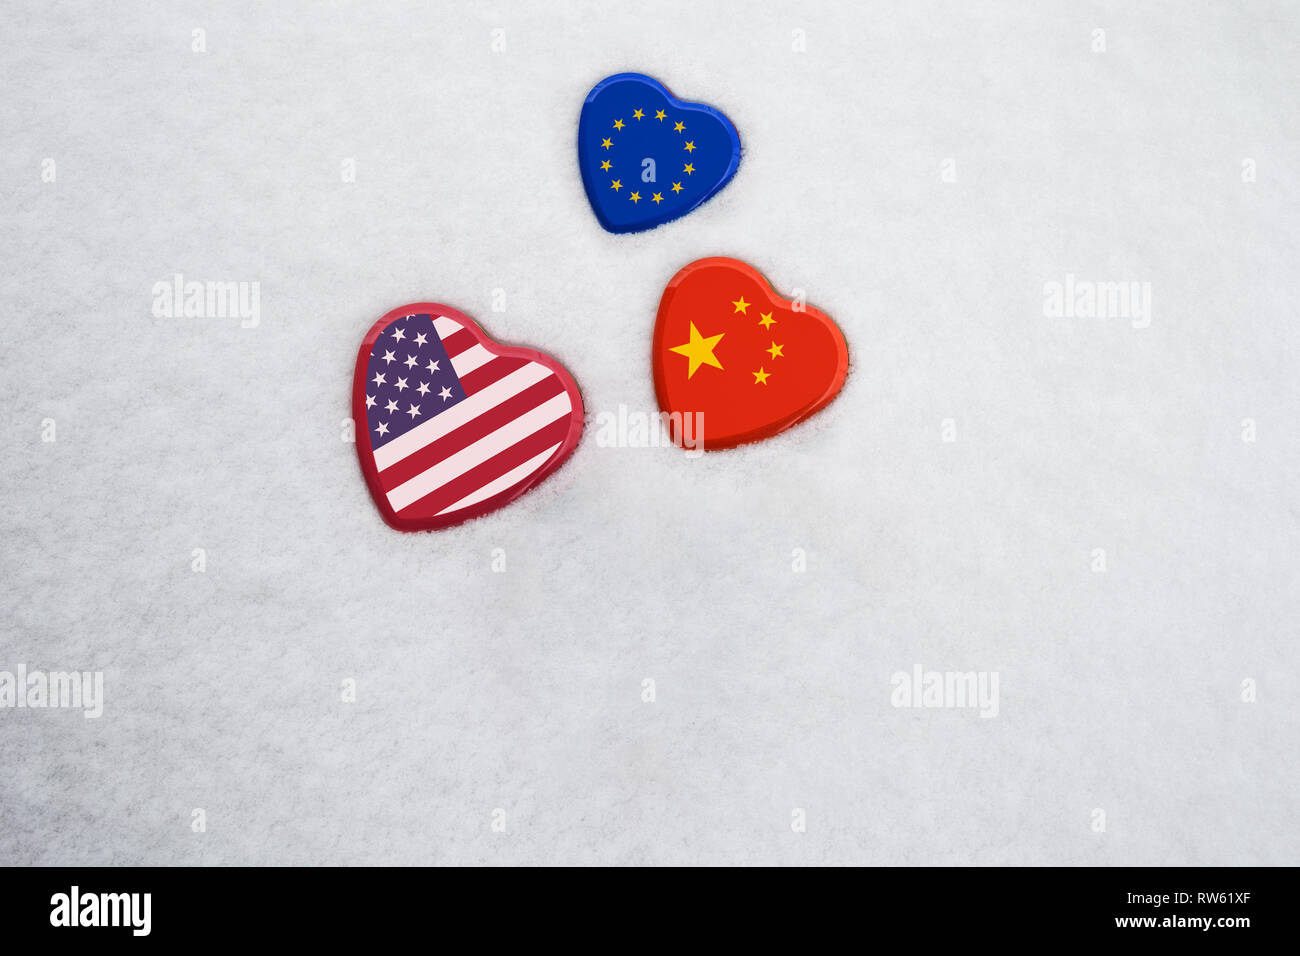 USA, China, EU national flags on heart shaped boxes laying on snow close together. Concept of economic political relationships and partnerships Stock Photo